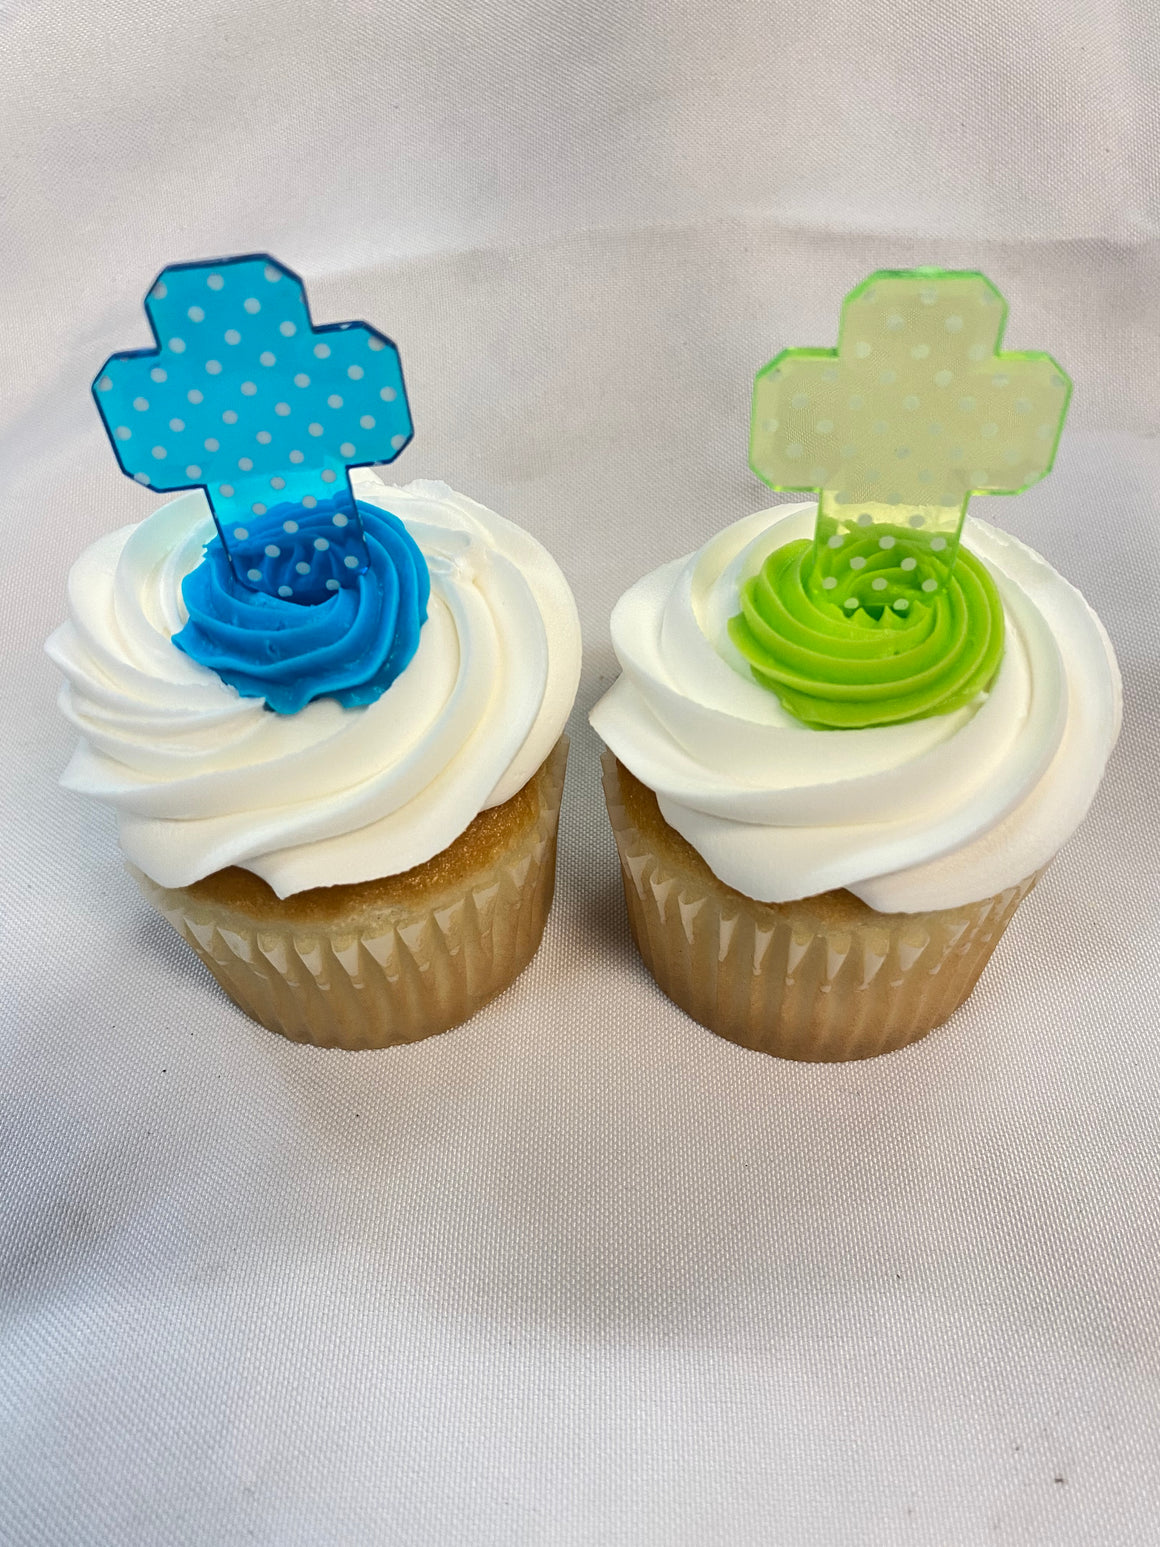 Religious Cupcakes - Lime Green & Bright Blue Crosses